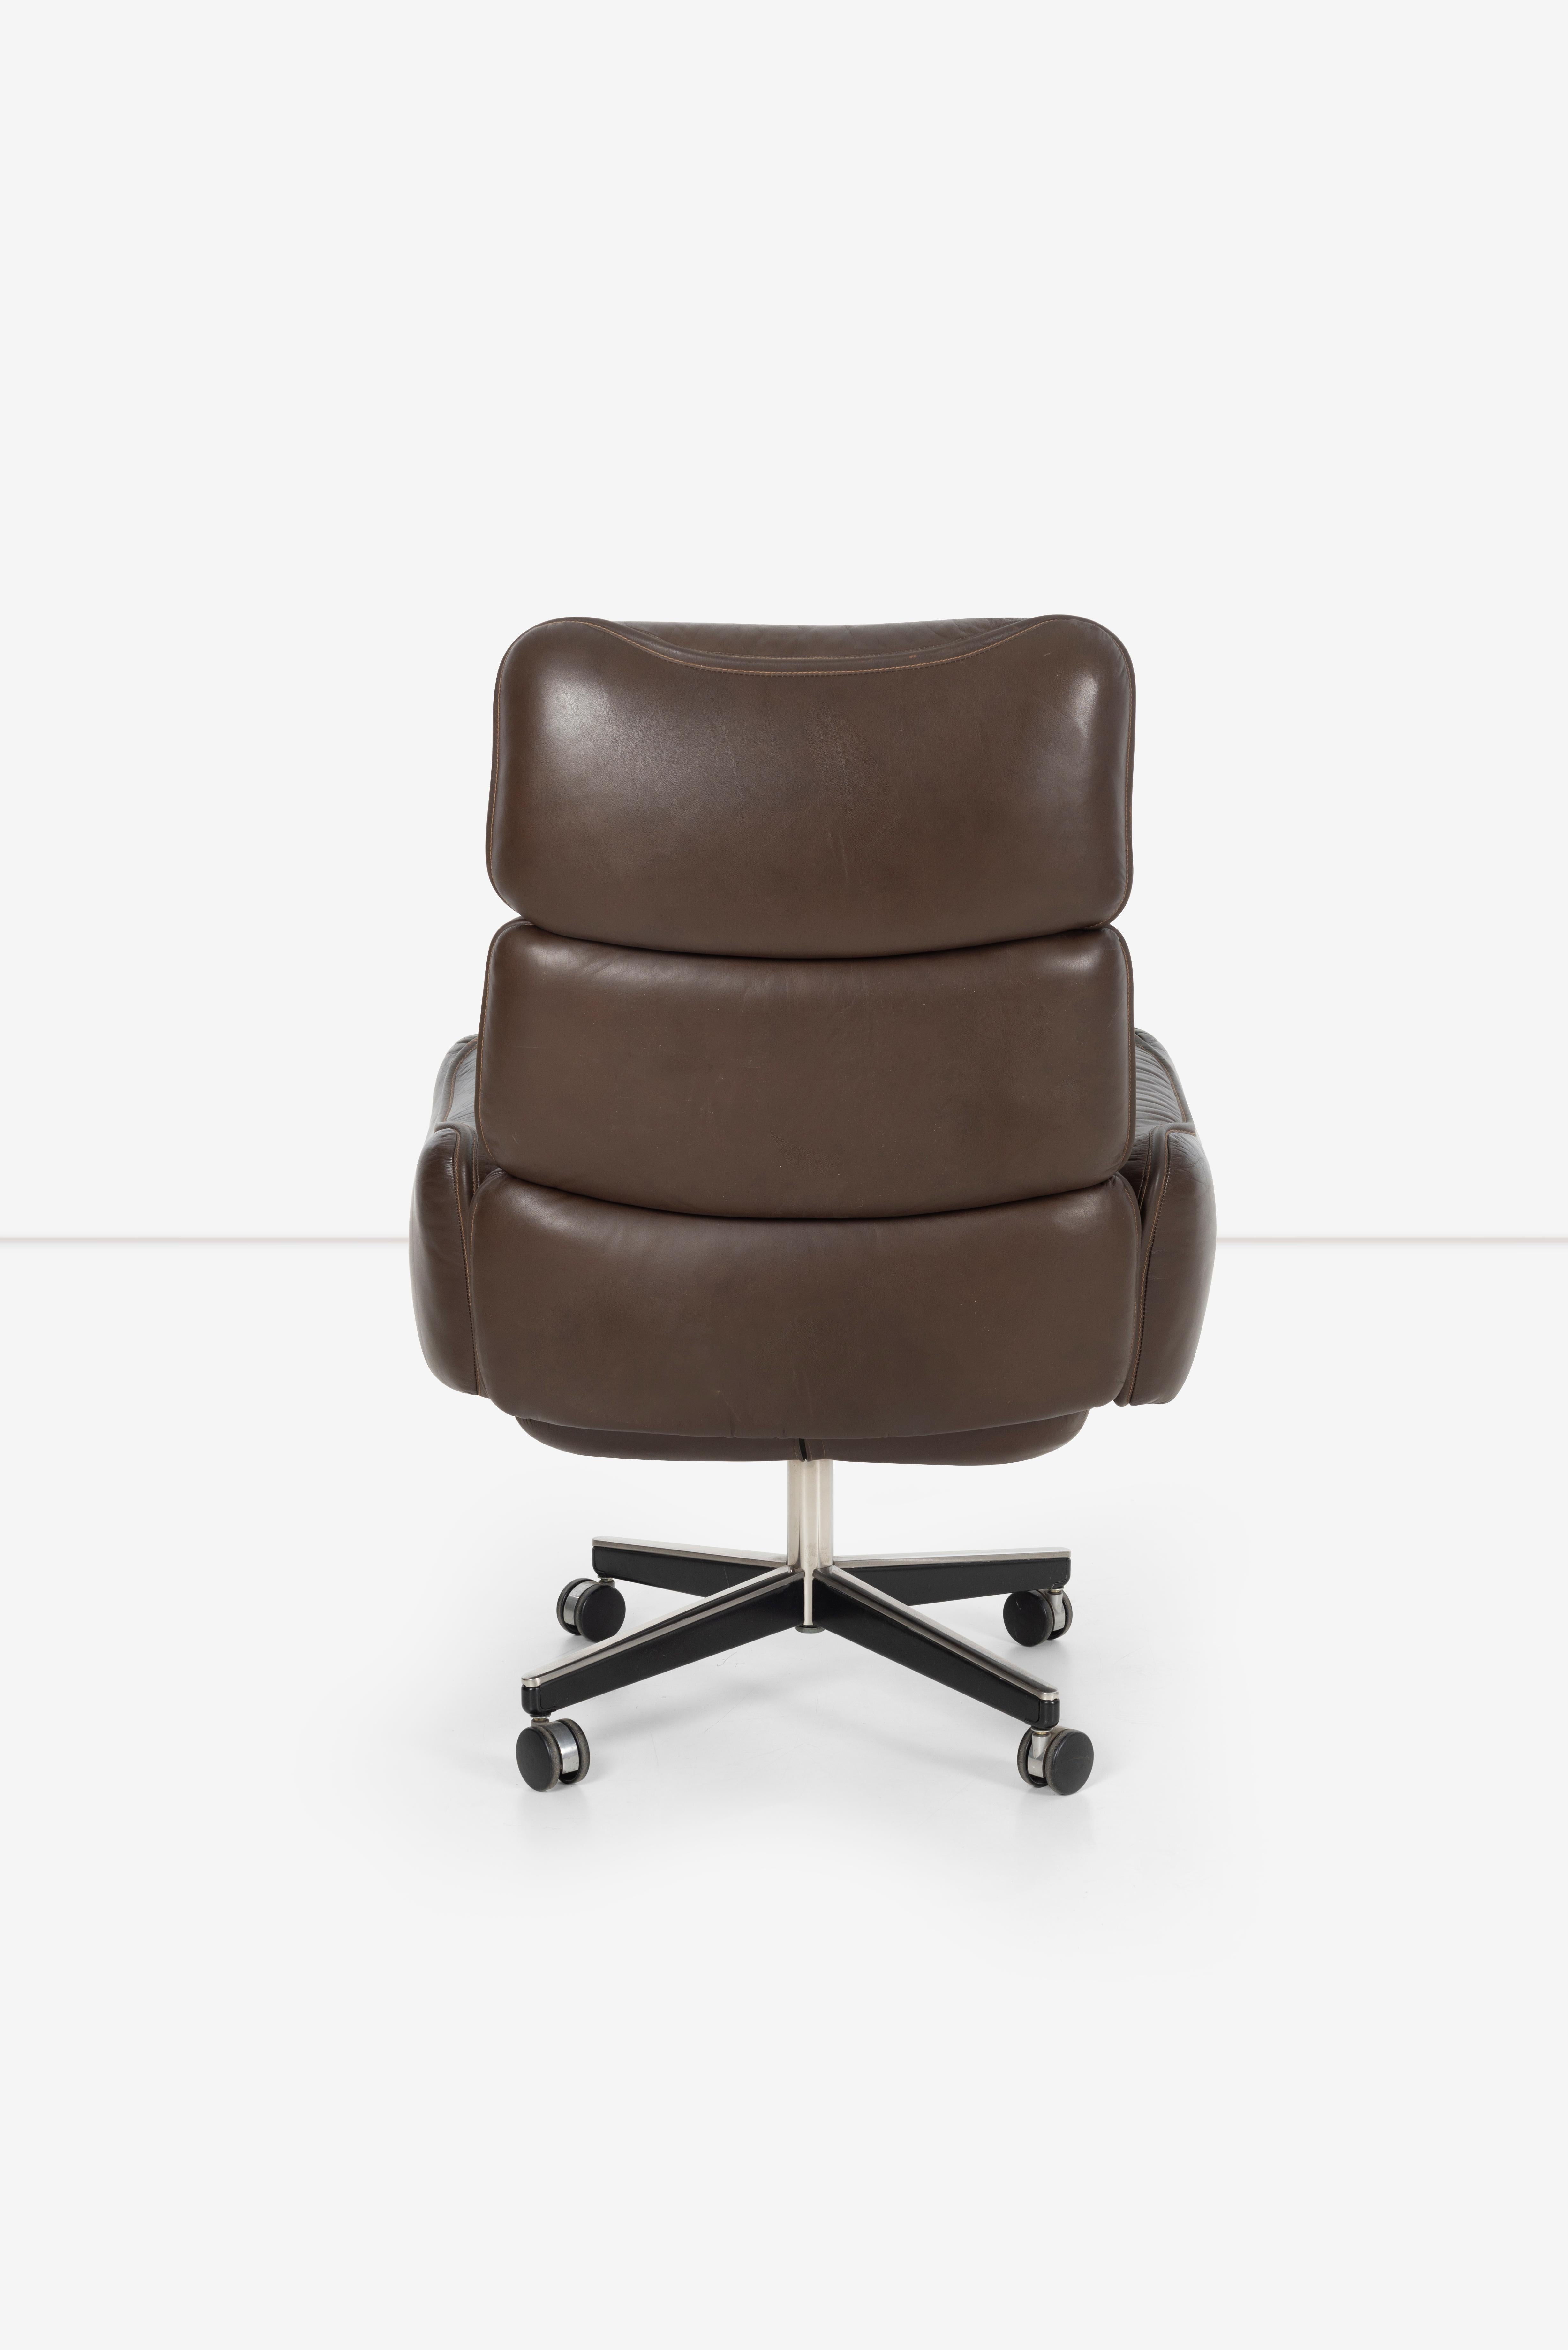 Late 20th Century Otto Zapf Executive Chair For Sale